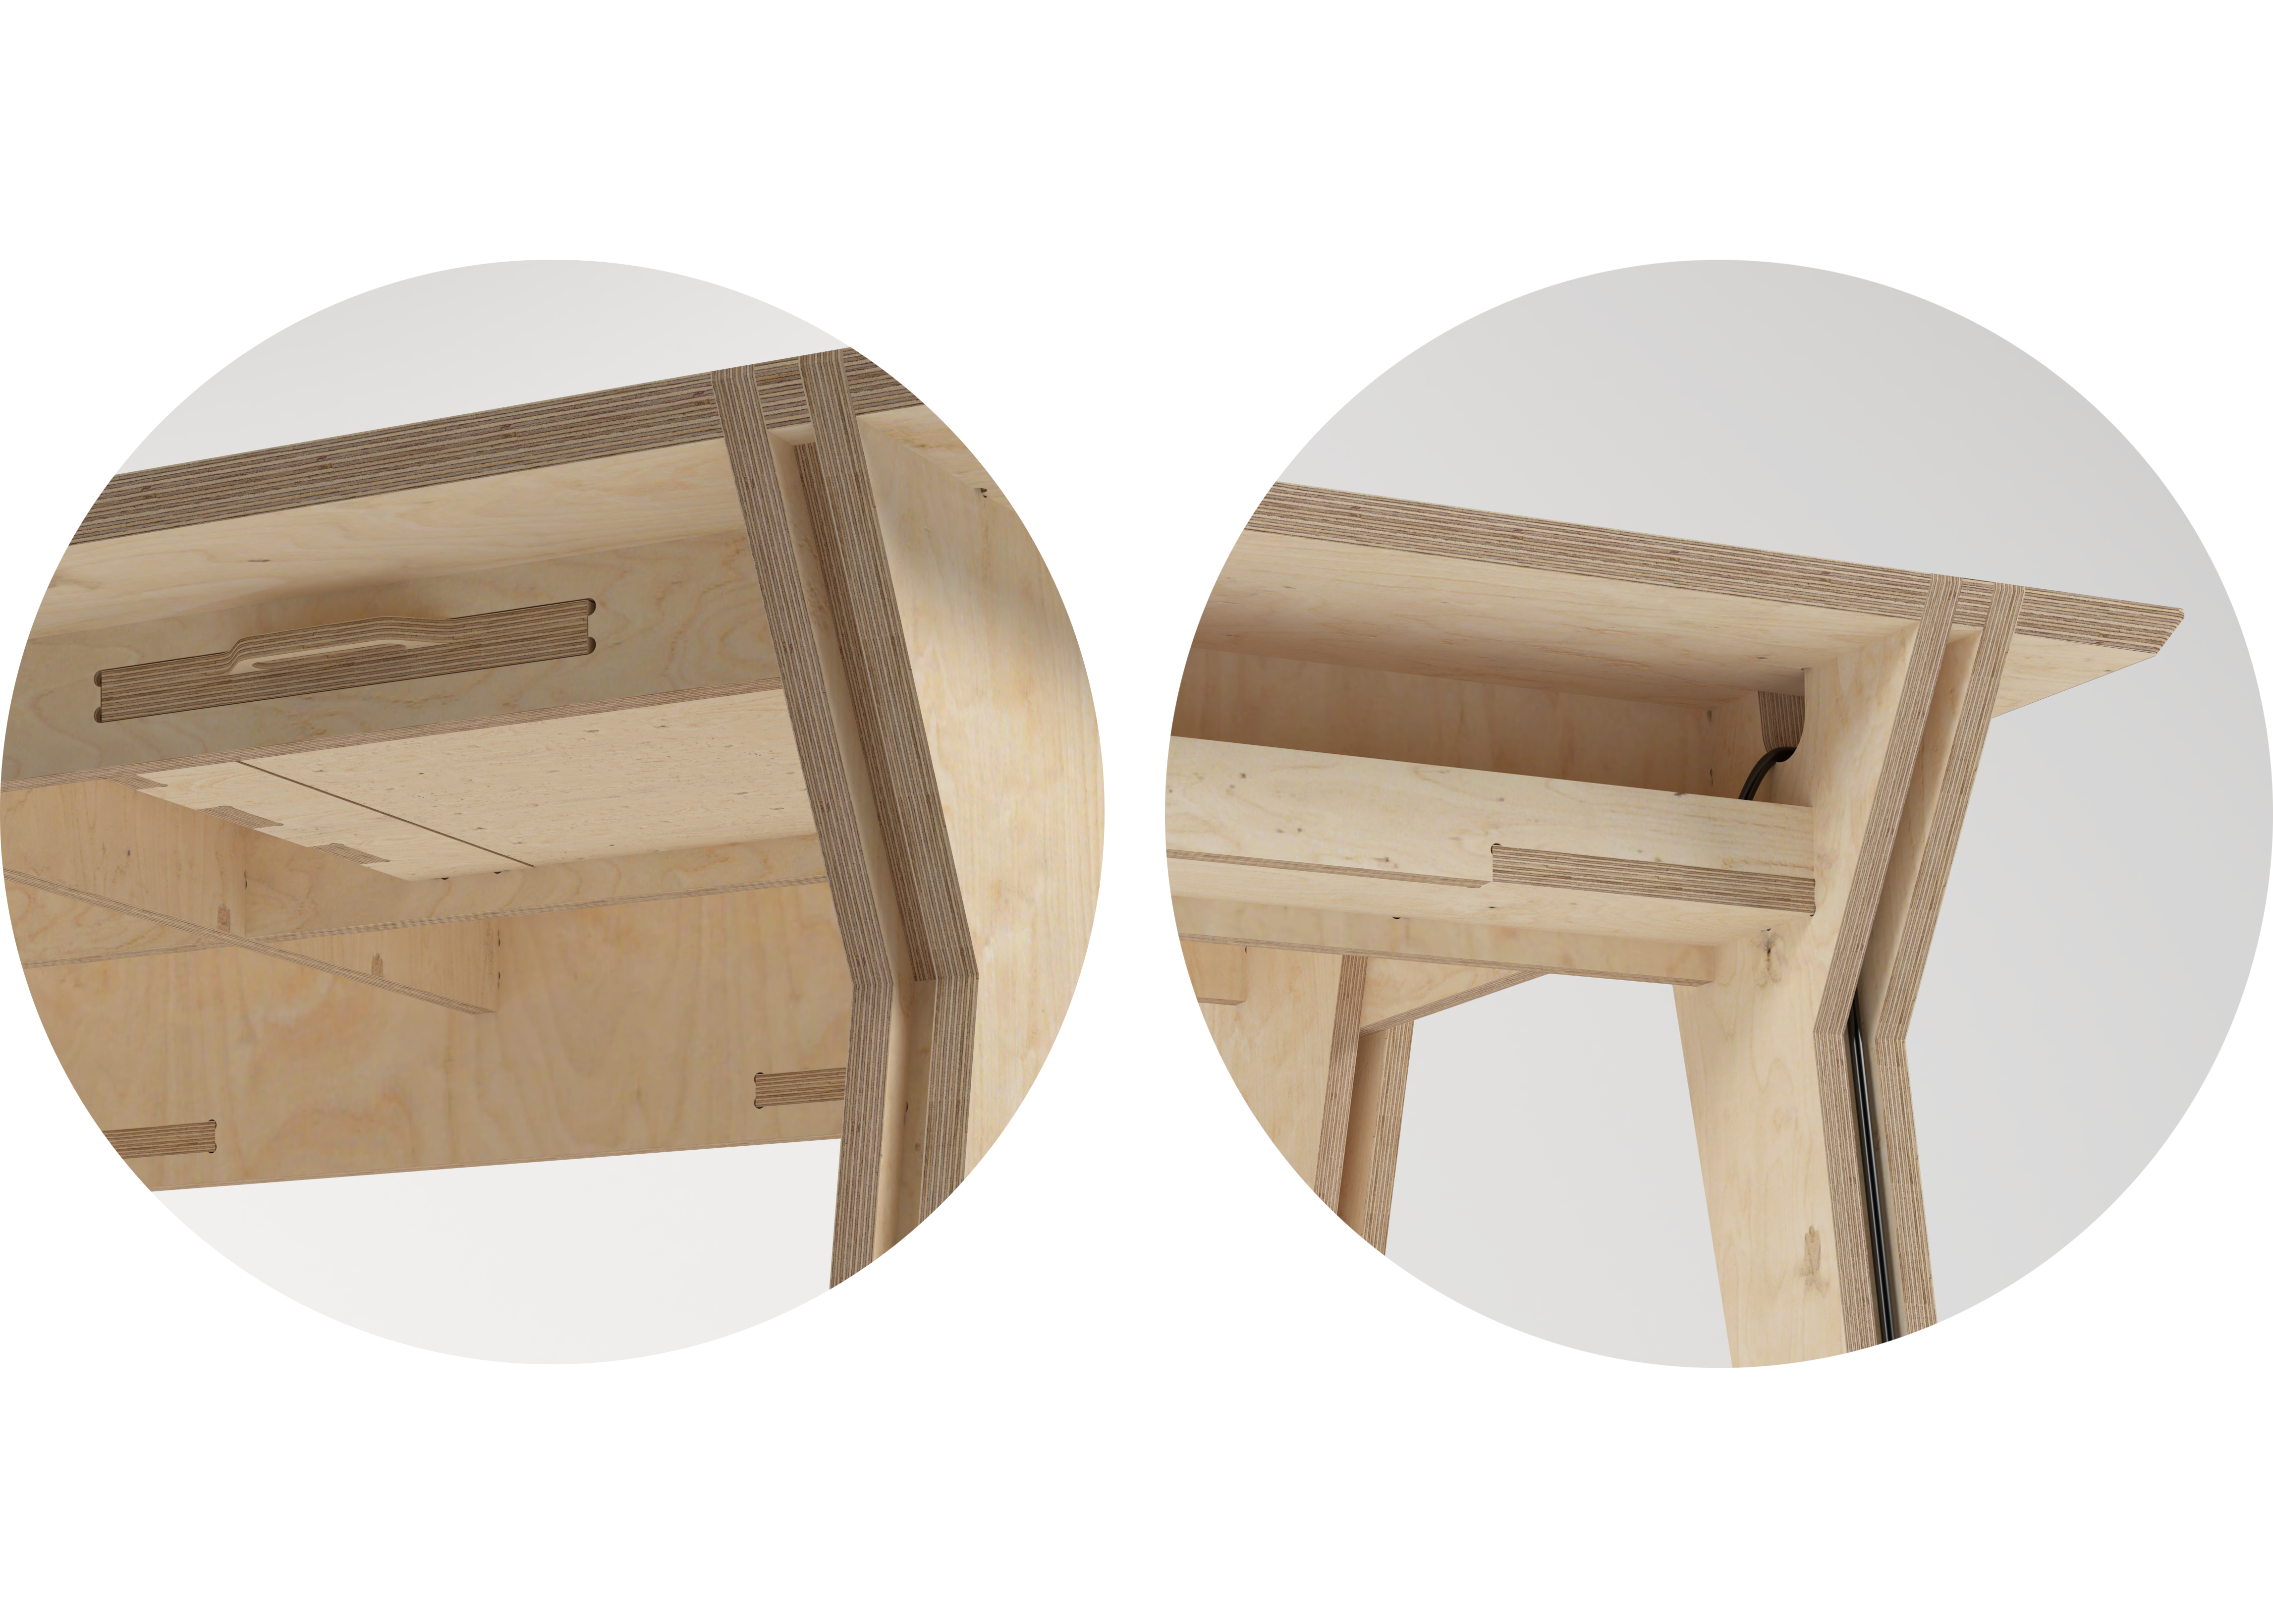 A rendering of the details of our desk made with birch plywood